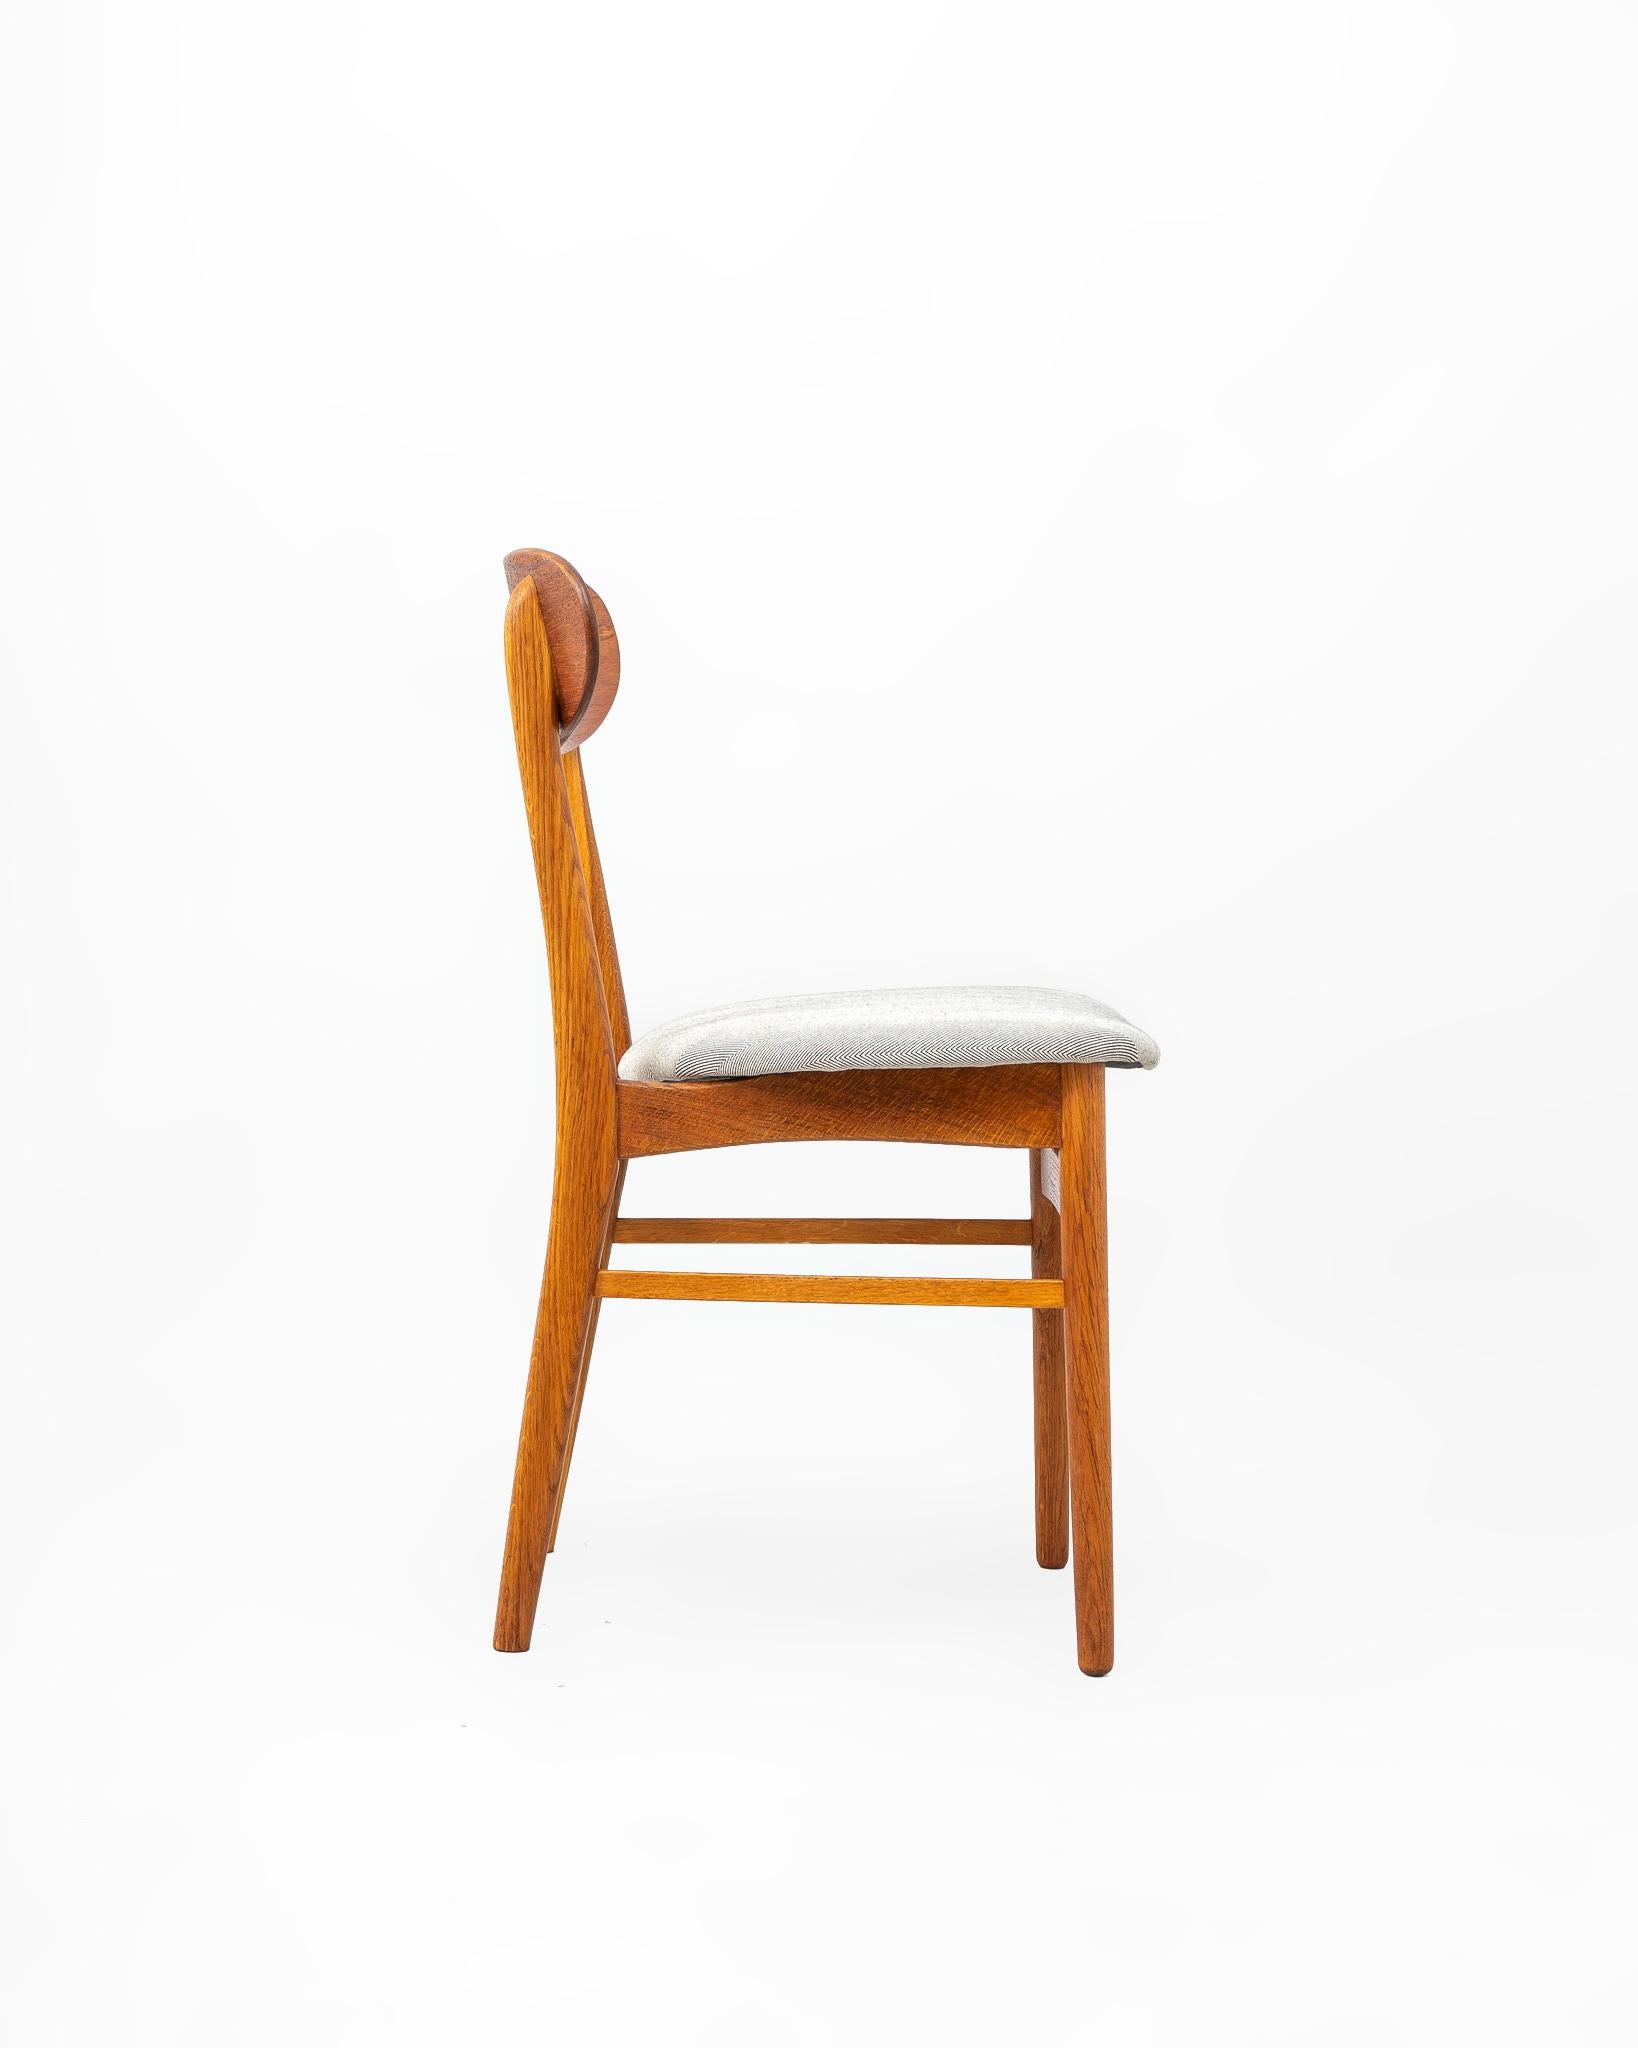 Oiled Pair of Danish Chairs Made of Teak, circa 1960 For Sale